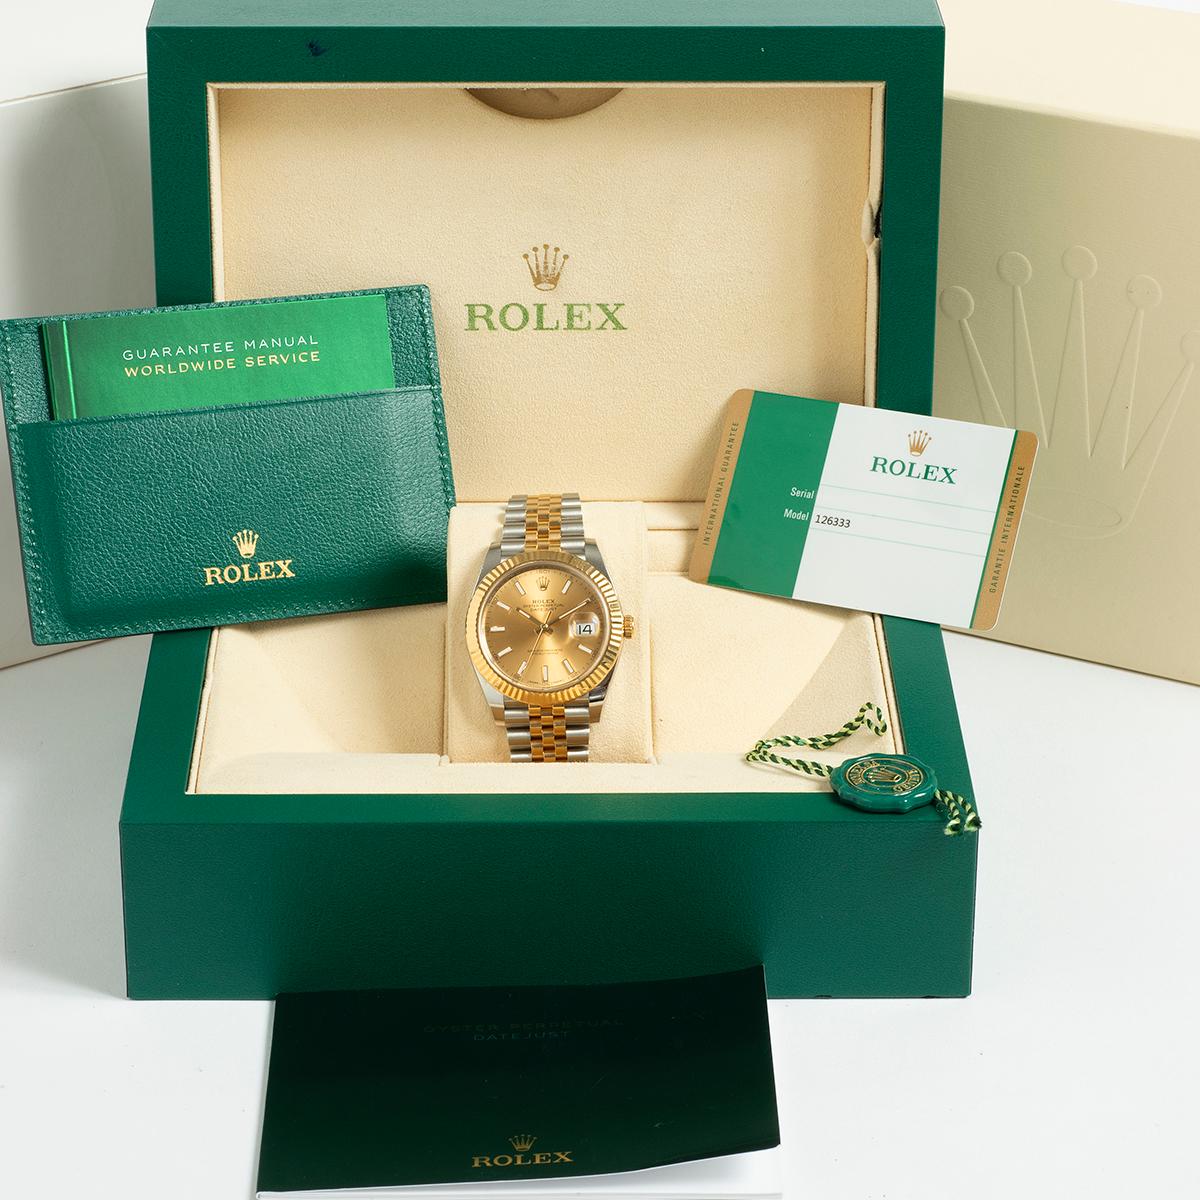 Our Rolex Datejust 41 features the classic and more desirable combination of 18k yellow gold and stainless steel 41mm case with 18k yellow gold and stainless steel jubilee bracelet. A complete set, this example comprises inner and outer box,